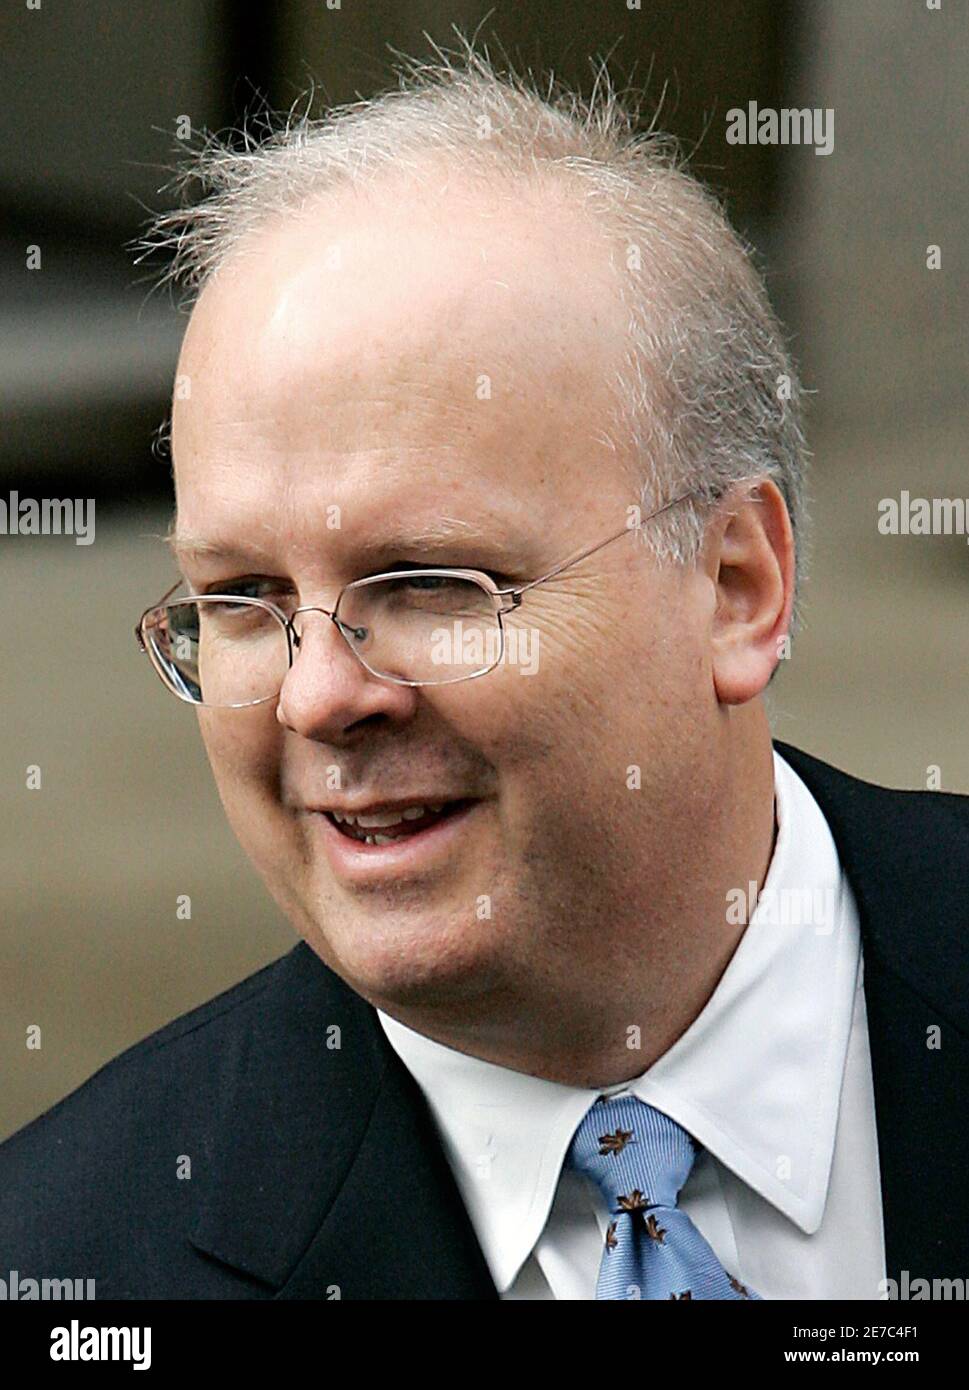 White House political advisor Karl Rove smiles as he departs the U.S. Federal Courthouse after testifying for the fourth time before a federal grand jury investigating the CIA leak case in Washington, October 14, 2005. Rove, the most powerful and controversial political strategist in Washington, had no comment as he entered the federal courthouse on Friday morning to begin his testimony, hoping to convince grand jurors he did nothing illegal. He also declined to comment when he left 4-1/2 hours later, mouthing to reporters: 'Not supposed to take questions. Stock Photo